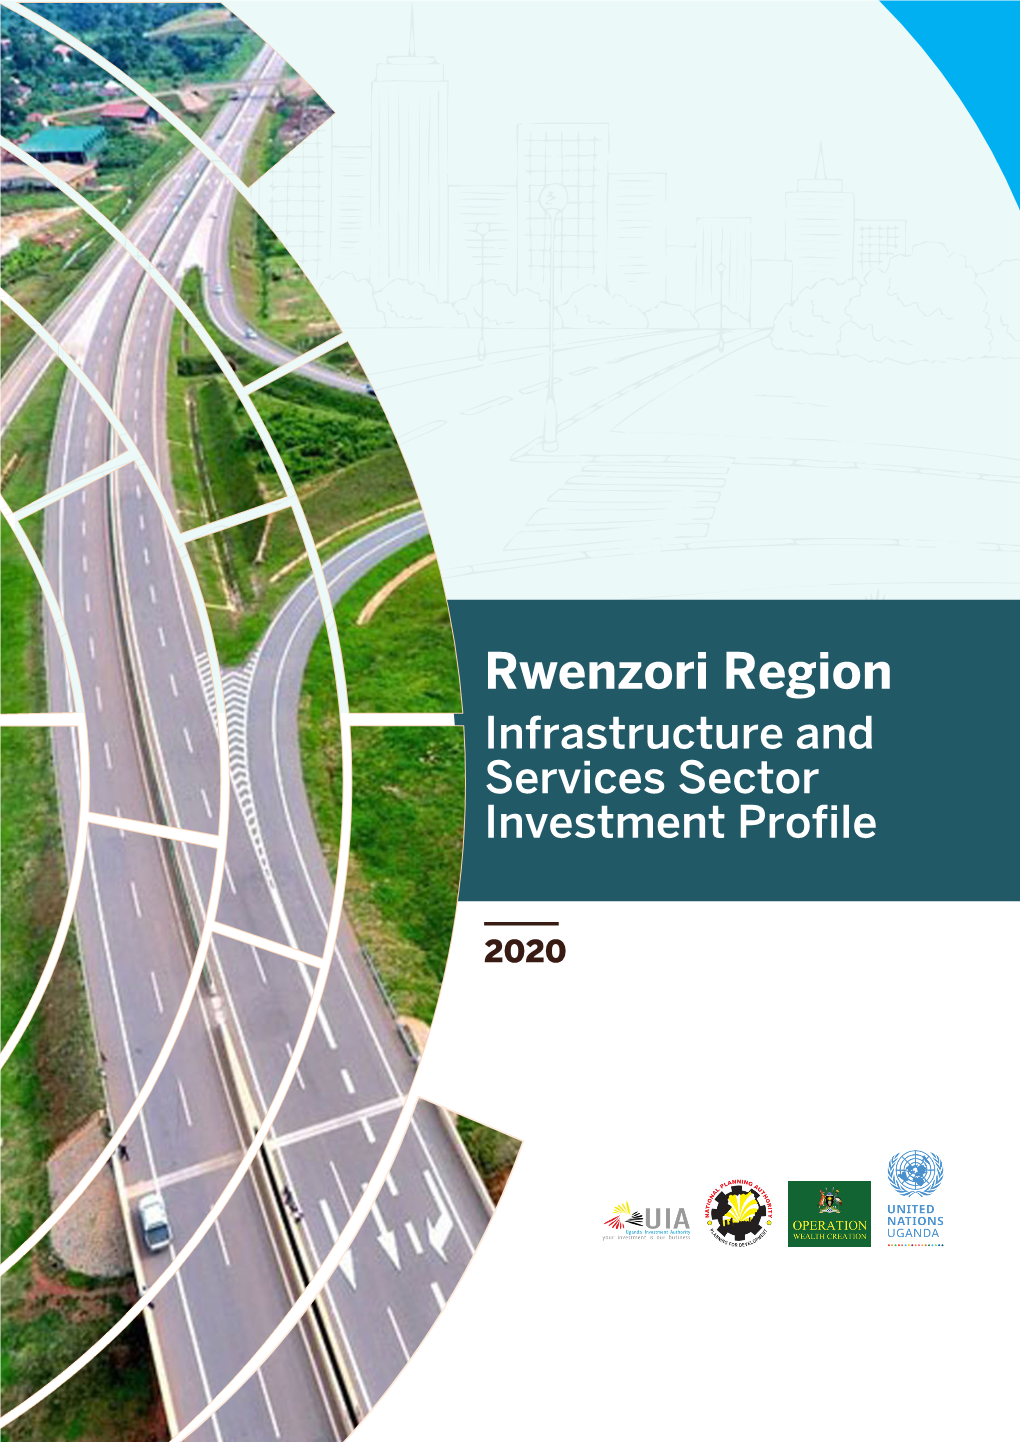 Rwenzori Region Infrastructure and Services Sector Investment Profile